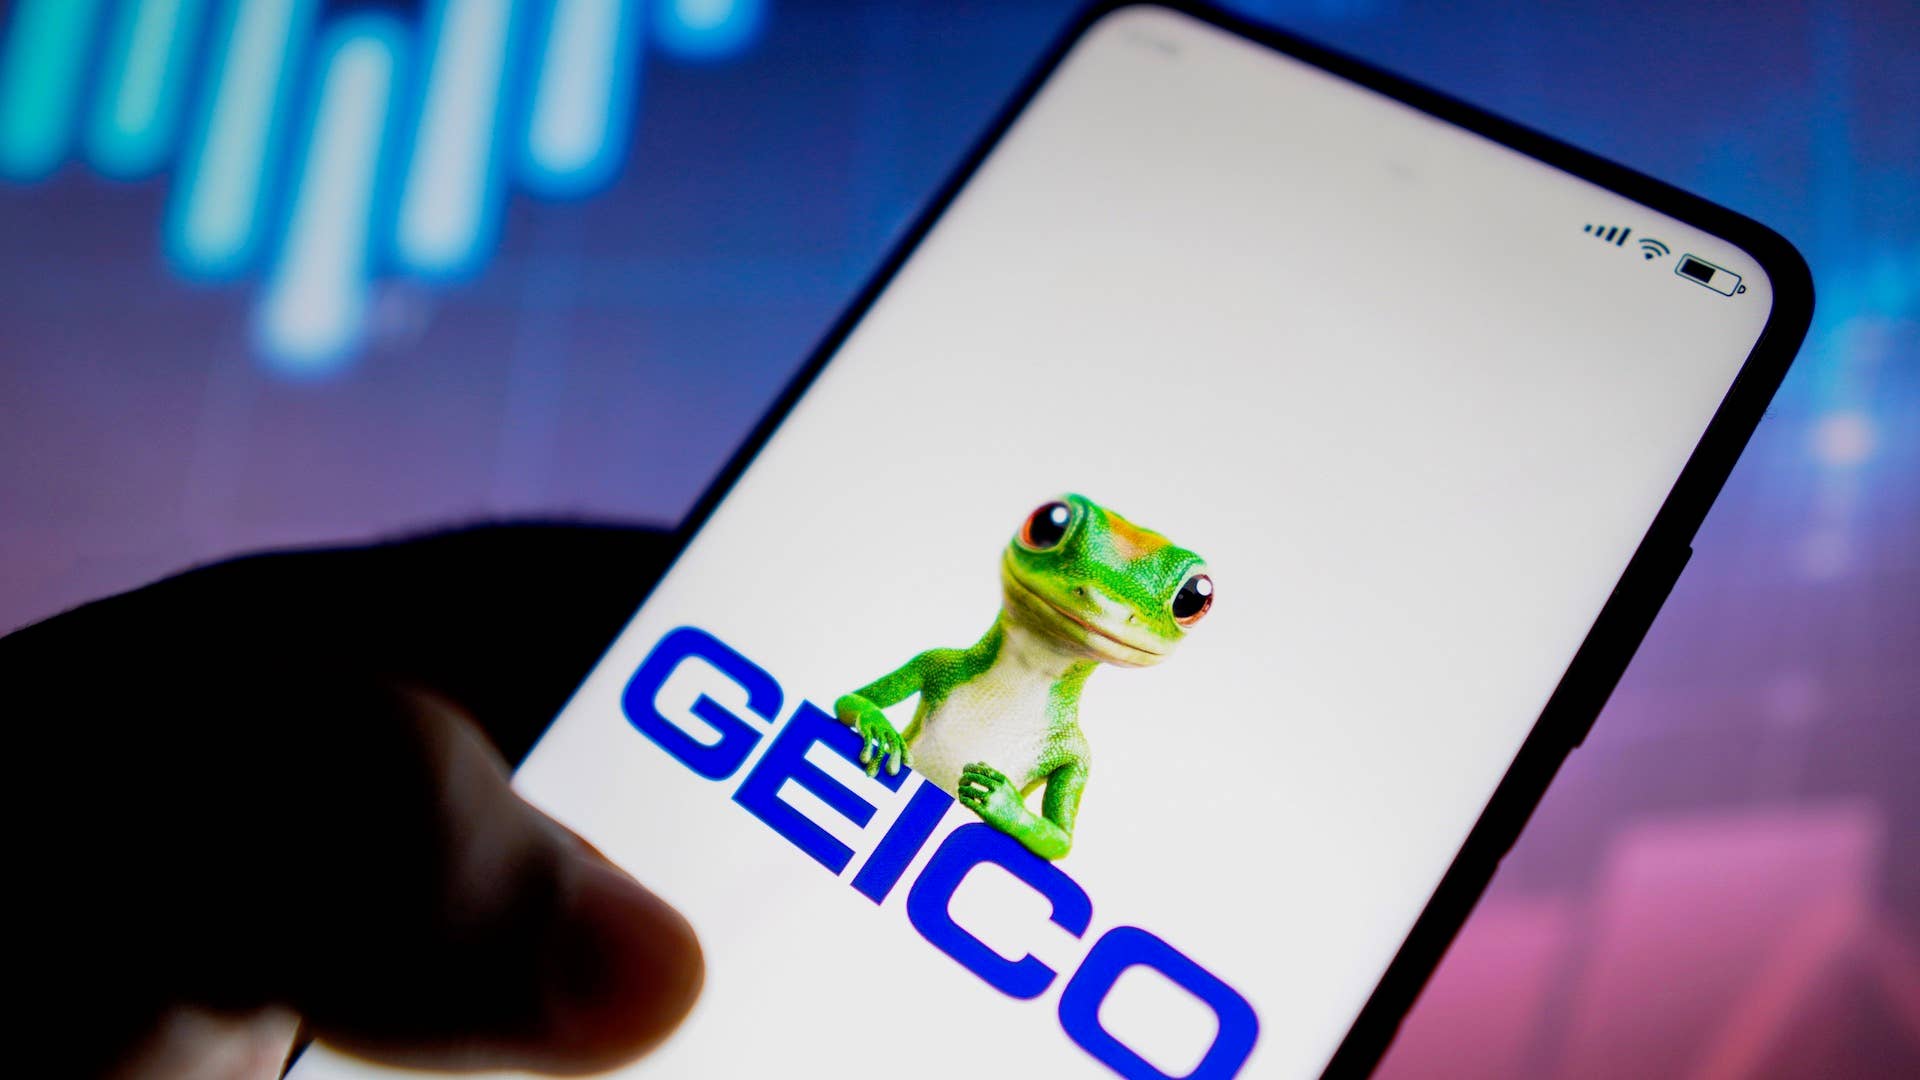 the Government Employees Insurance Company (GEICO) logo seen displayed on a smartphone